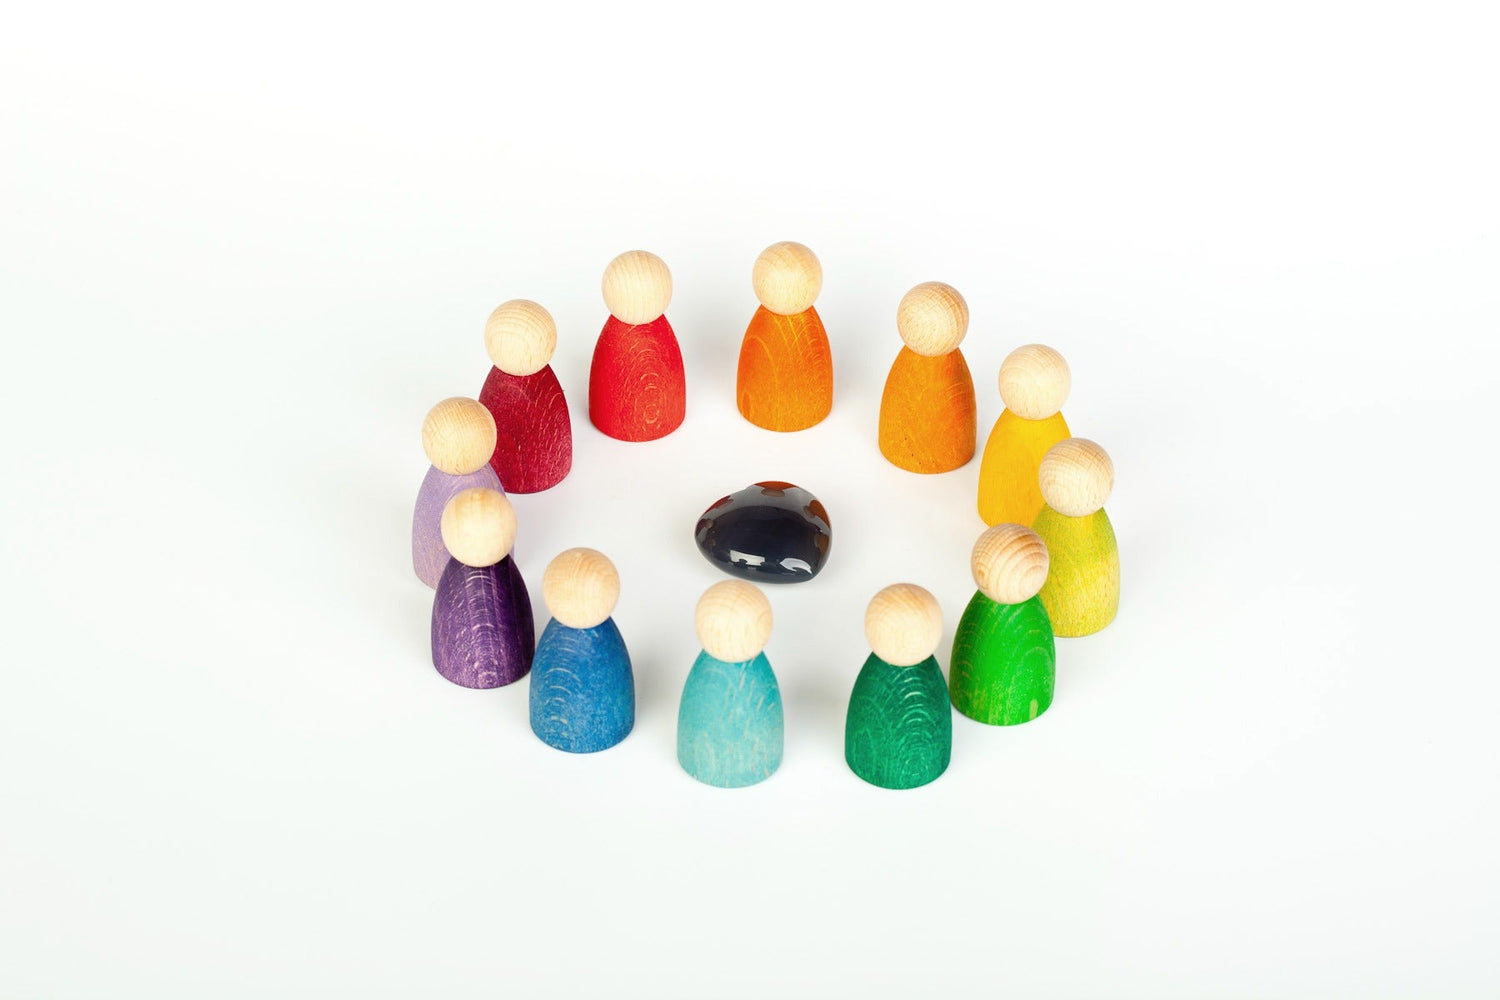 GRAPAT NINS (12 PIECES) by GRAPAT - The Playful Collective